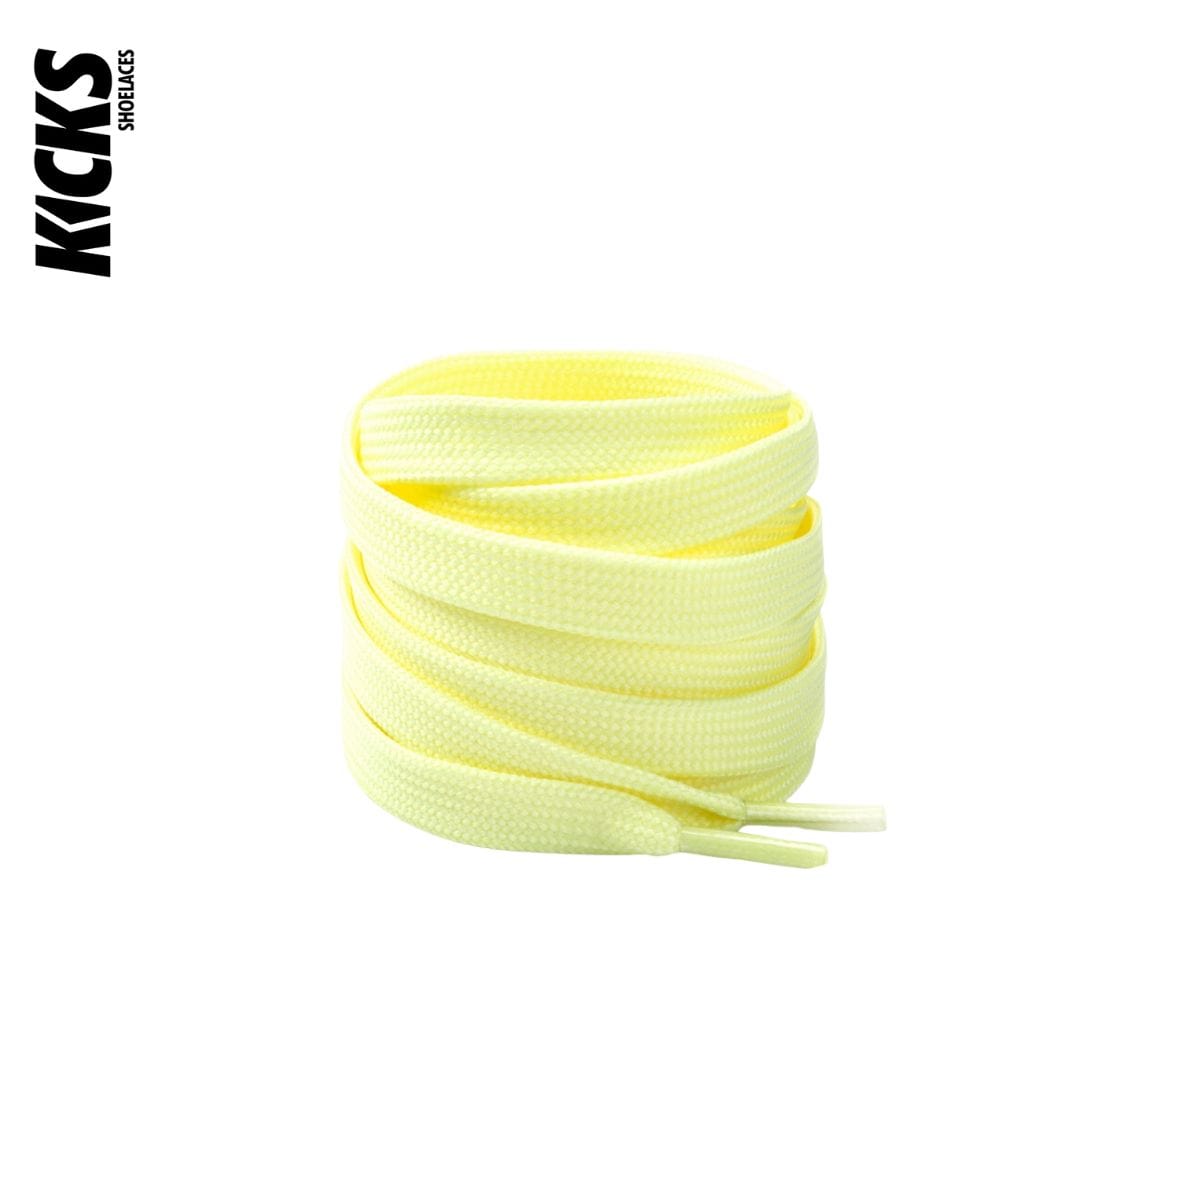 Light Yellow Replacement Shoe Laces for Adidas NMD Sneakers by Kicks Shoelaces